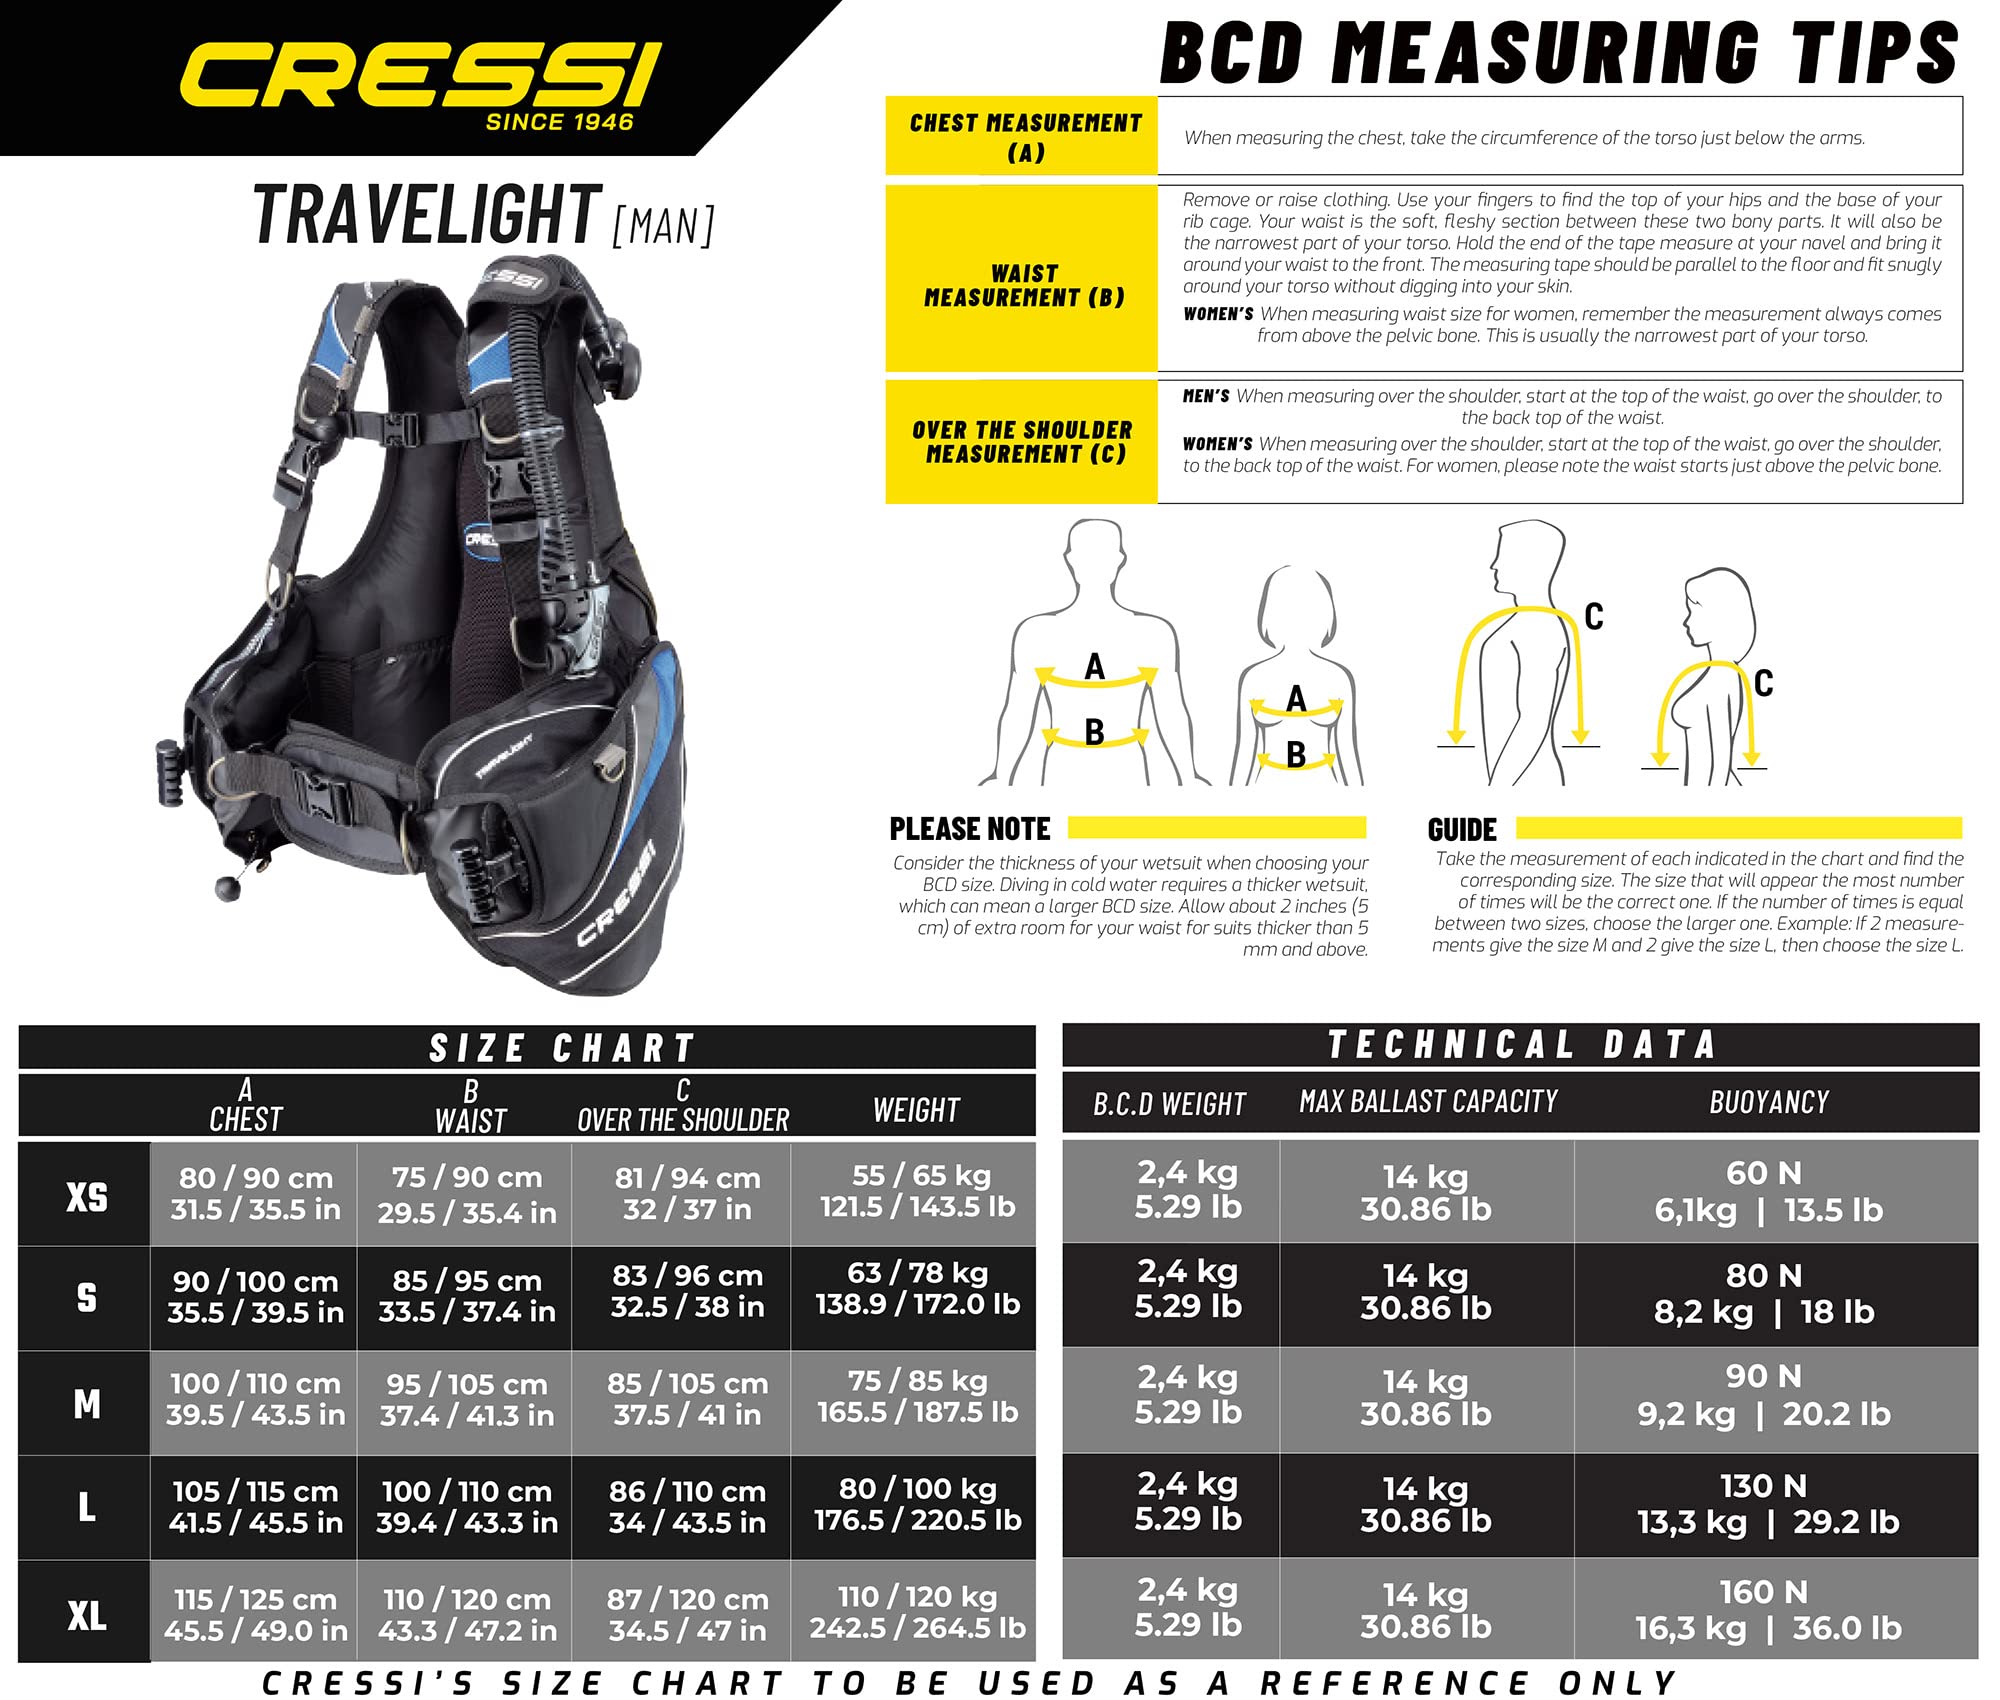 Cressi Lightest Travel Scuba Diving BCD - Folds Completely to Save Space - Fully Accessorised: 8 D-Rings, 2 Wide Side Pockets, 2 Rear Trim Pockets - High Lift Capacity - Travelight: Designed in Italy